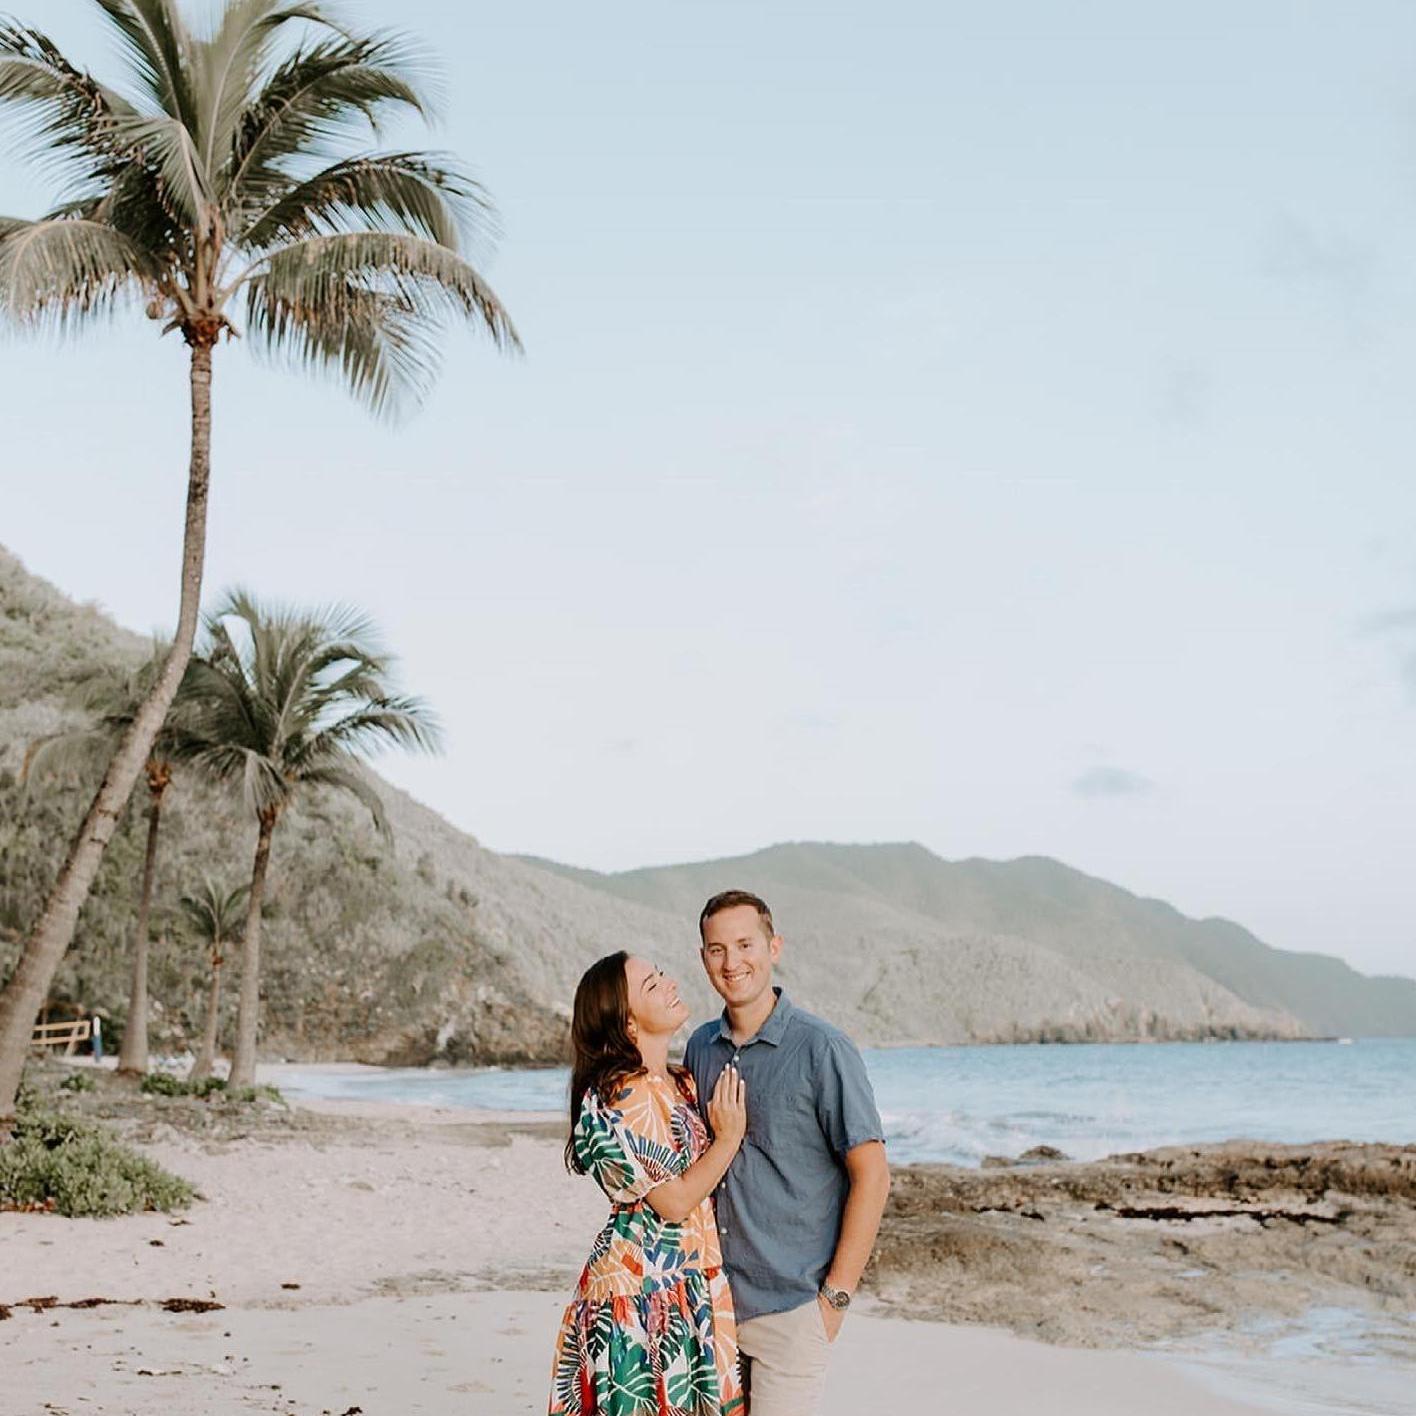 For their one year anniversary Sydney and Caleb went to St. Croix